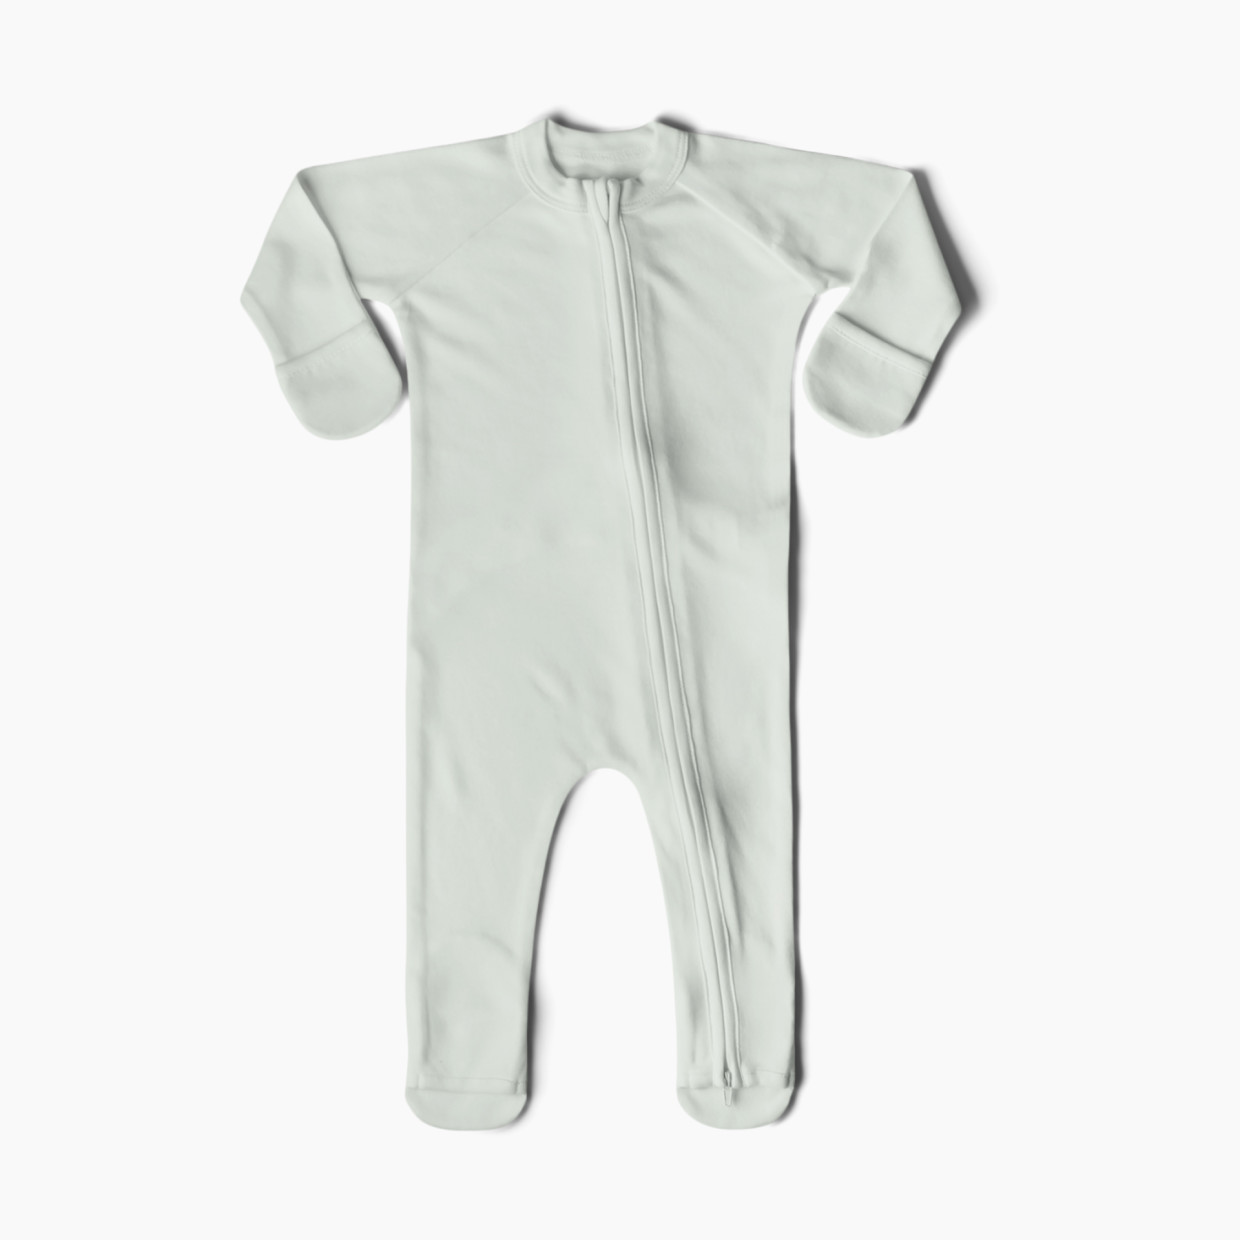 Goumi Kids Grow With You Footie - Loose Fit - Succulent, Nb.